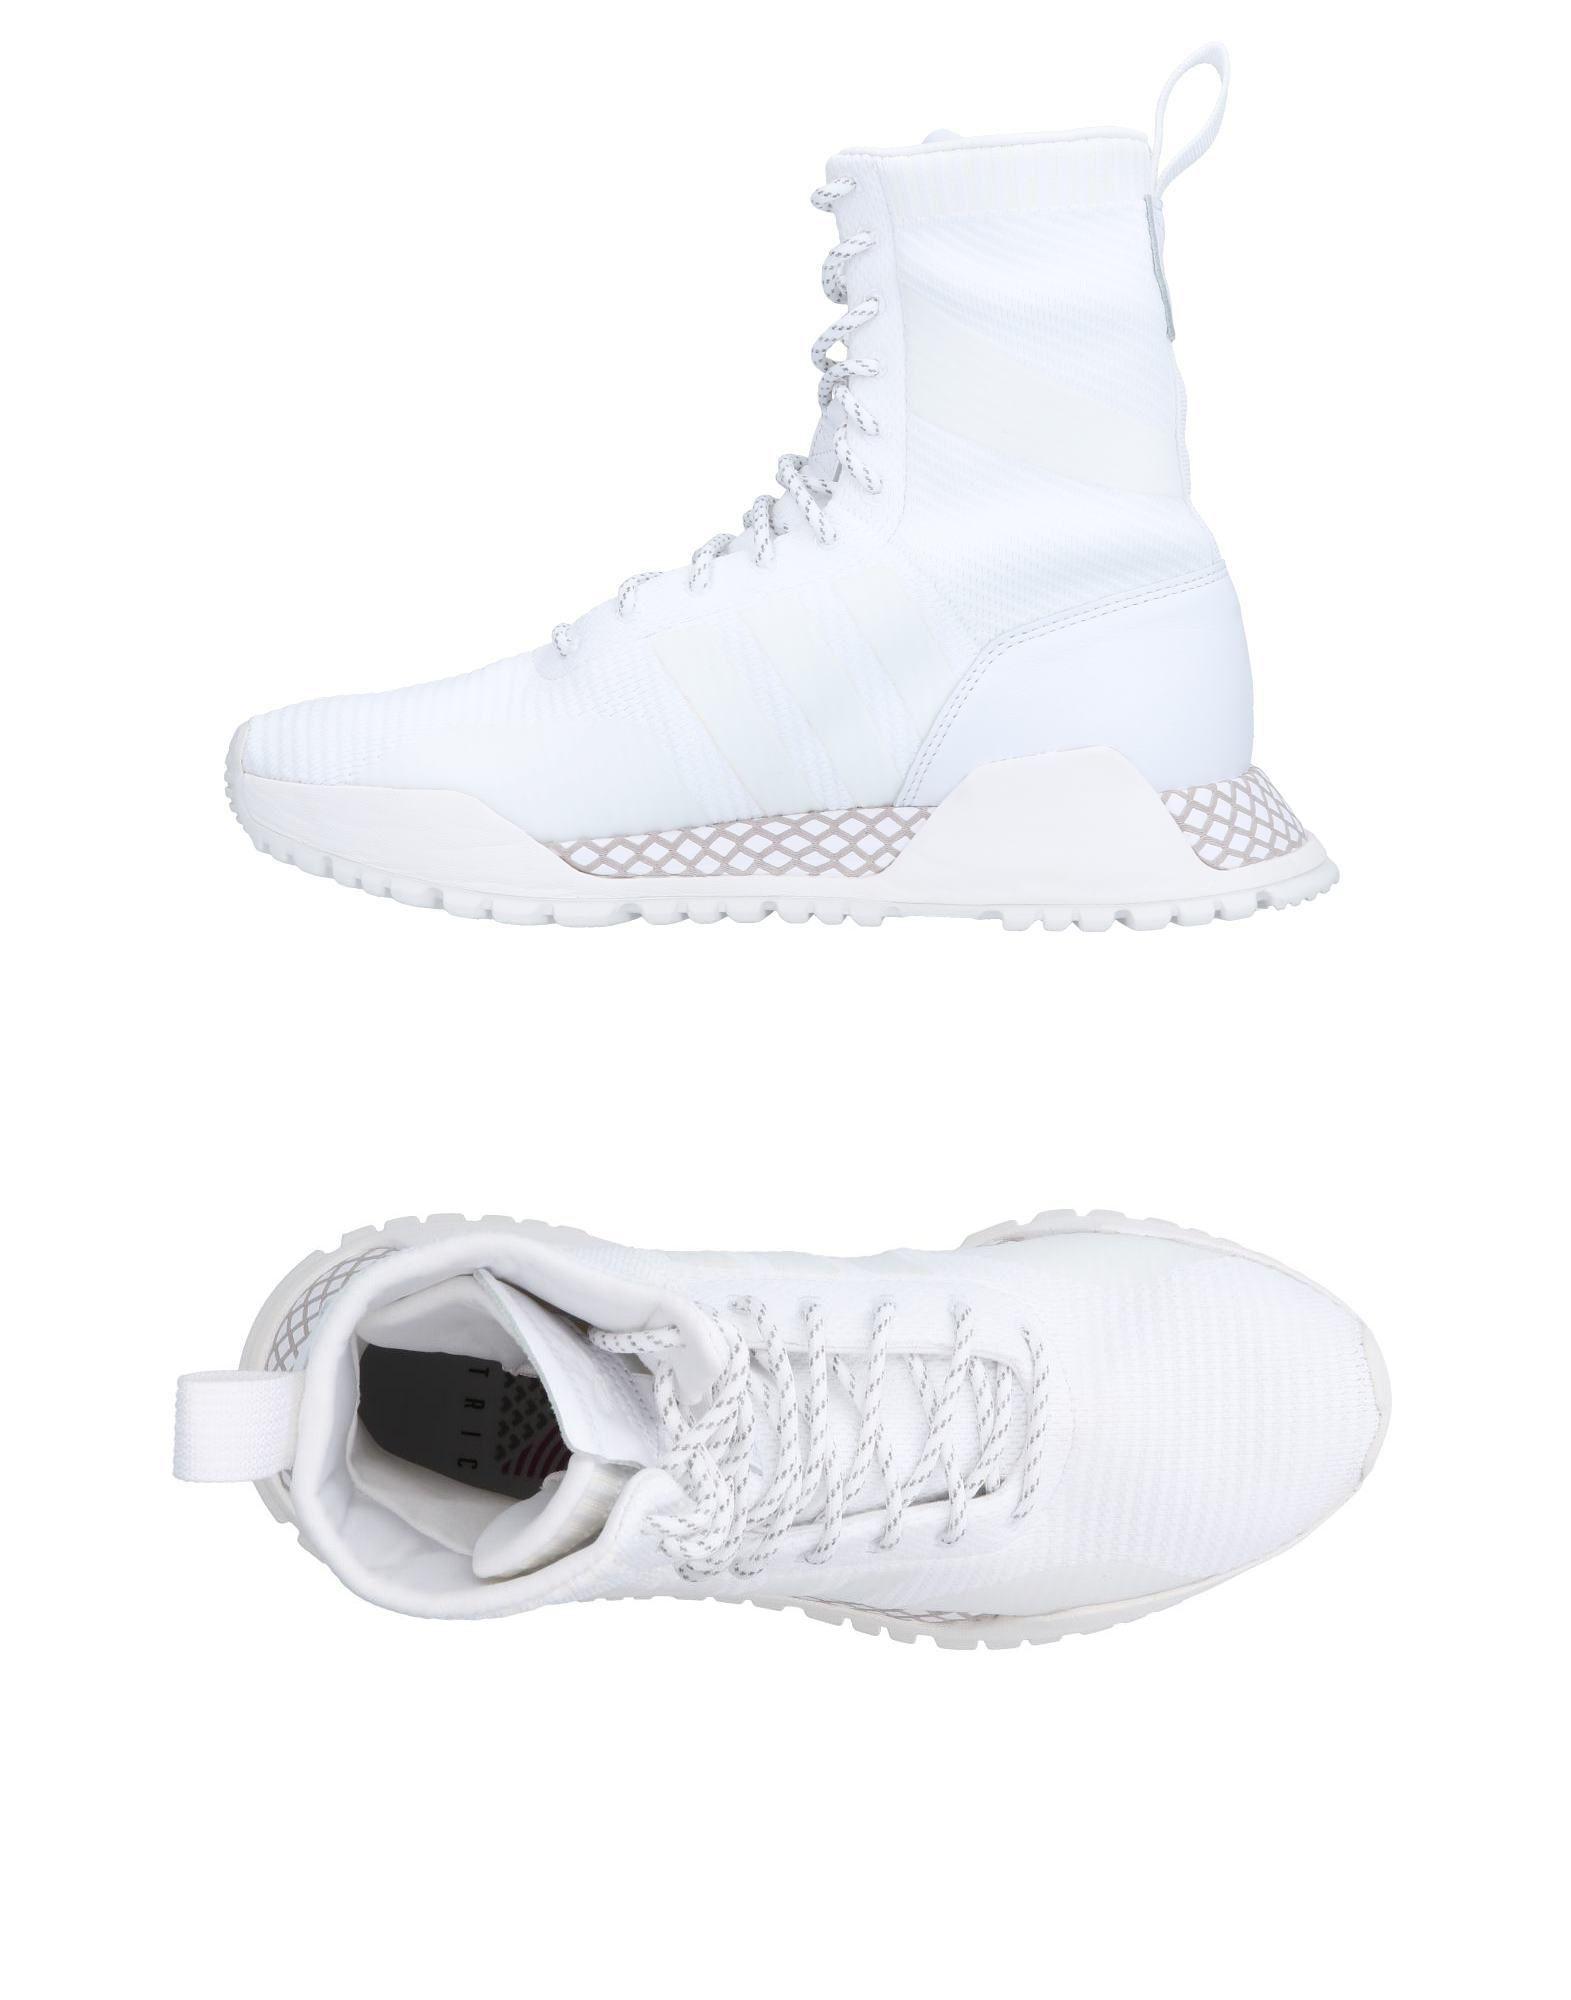 adidas Originals Leather High-tops & Sneakers in White for Men - Lyst